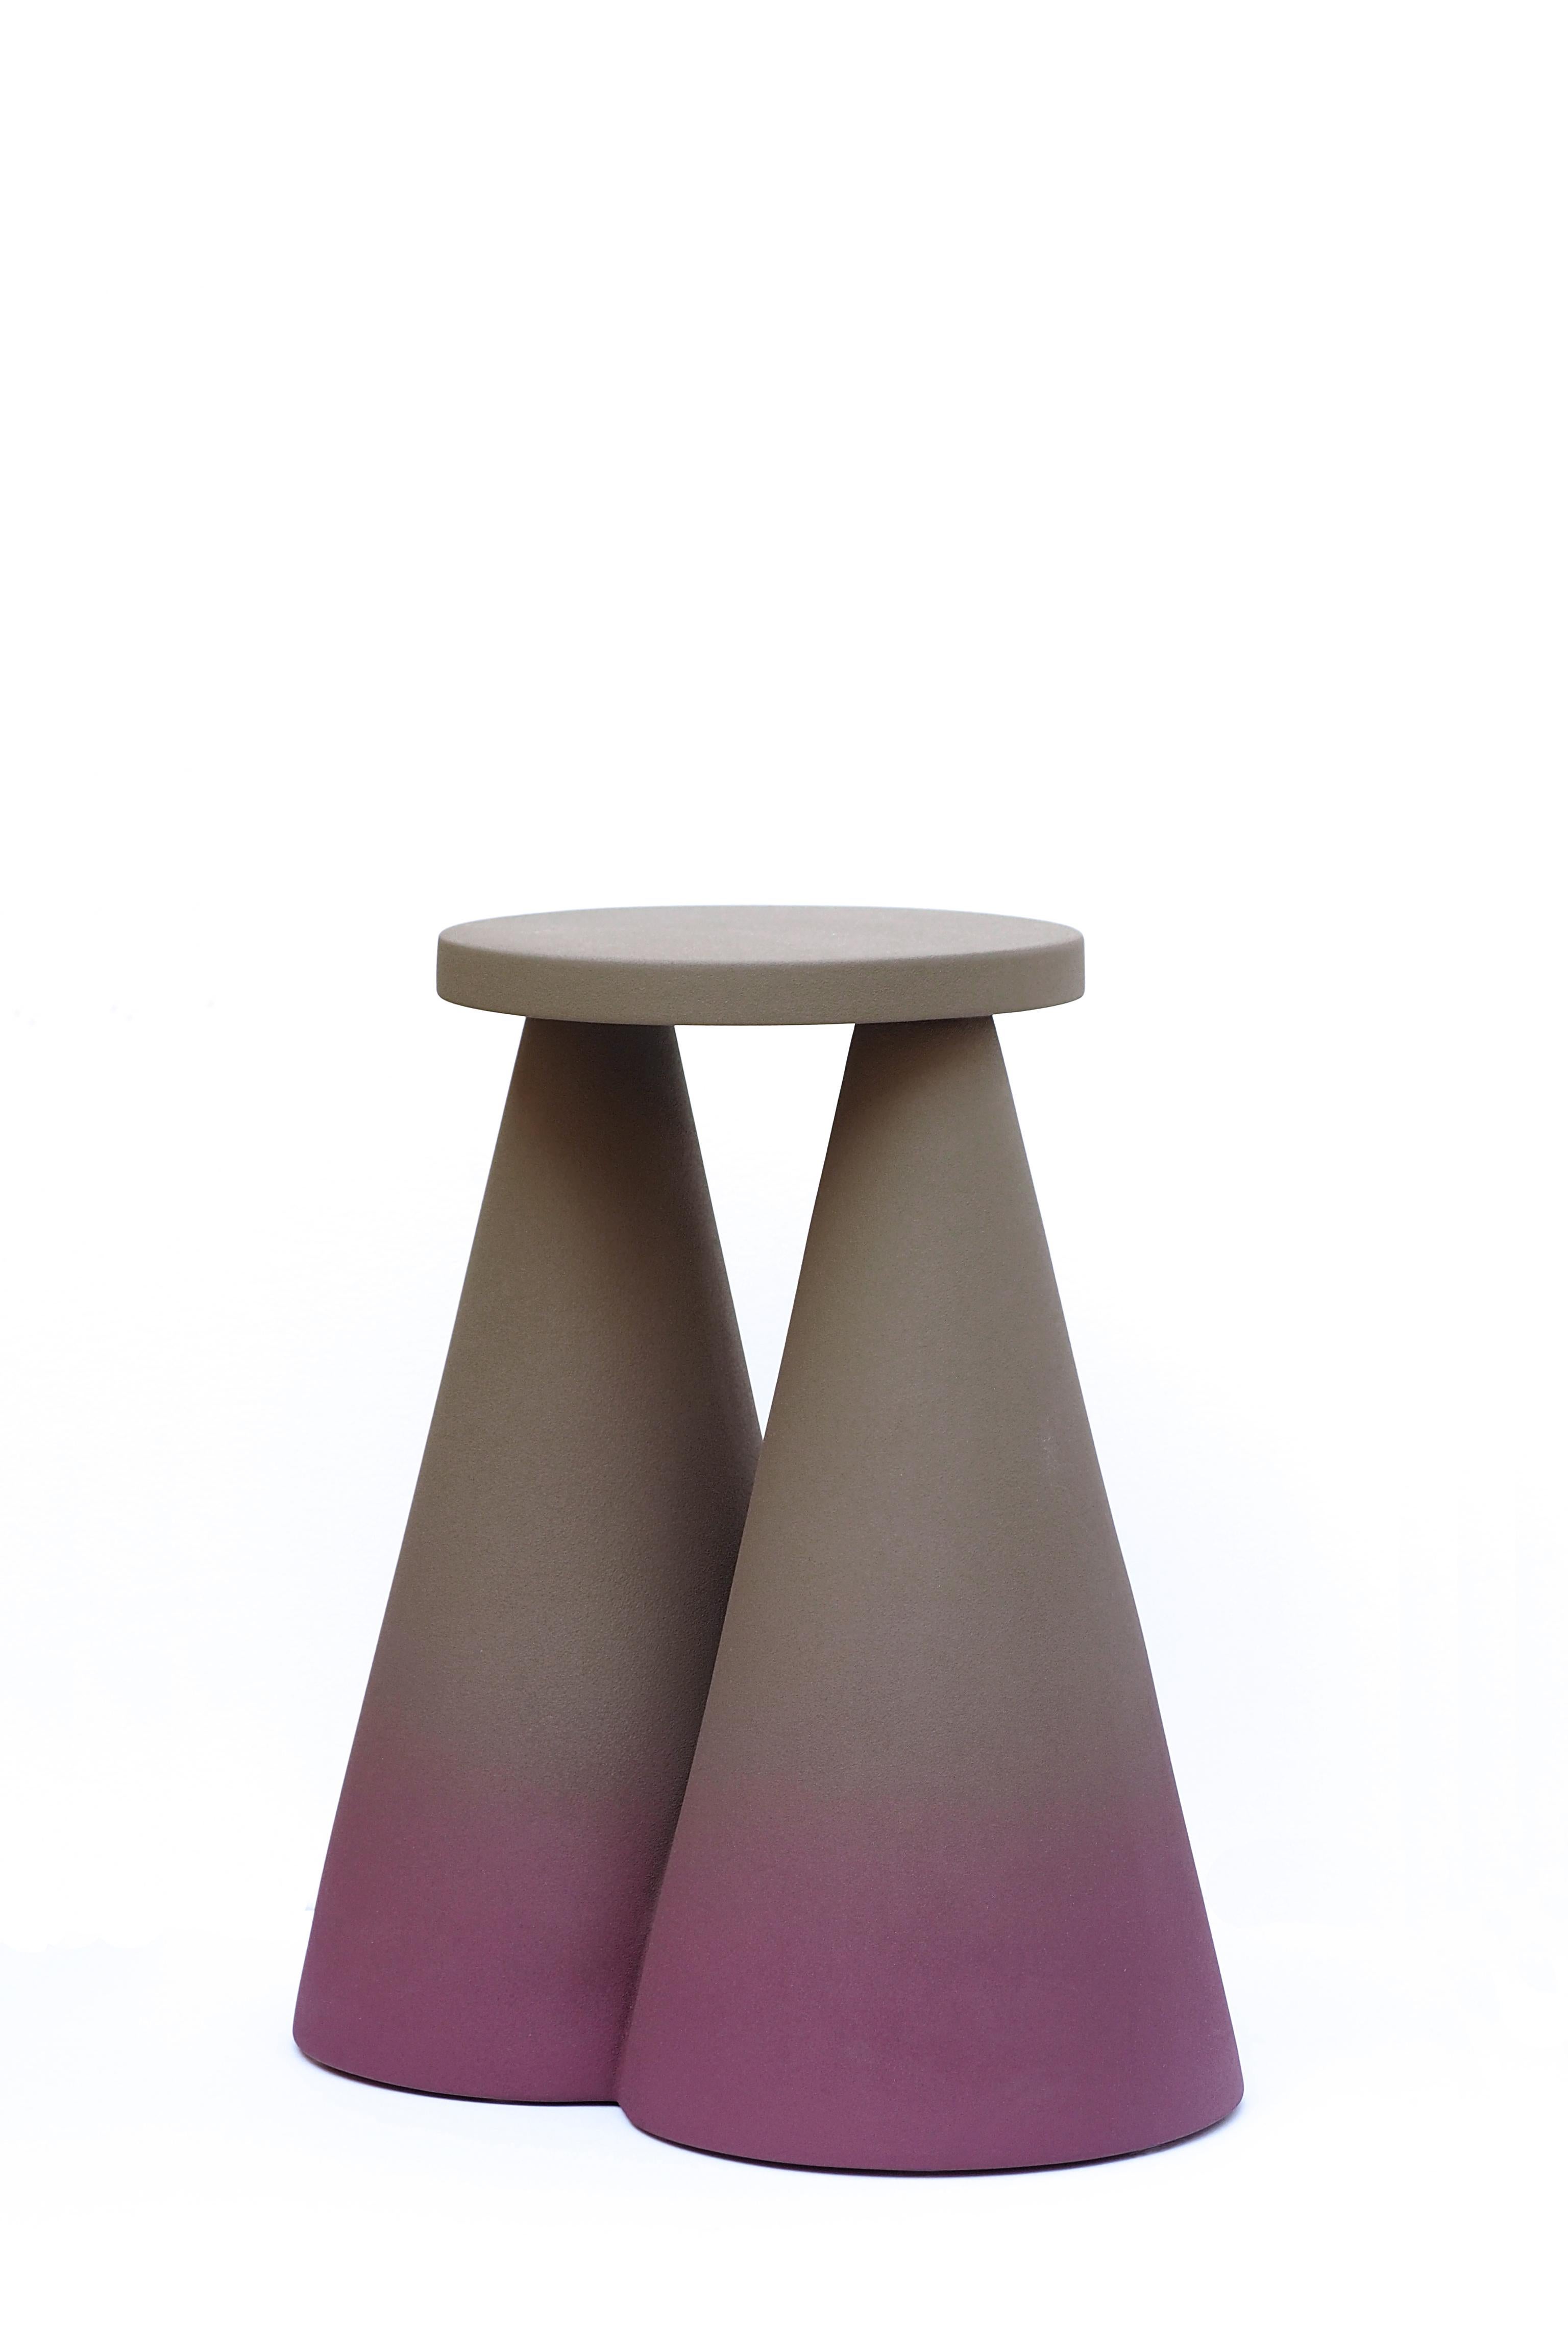 Isola side table by Cara Davide
Dimensions: 25 x 43 x H 45 
Materials: Ceramic or rough touch finishing

Isola side table is completely made in ceramic using high temperature
furnace, to make the material stronger.
The large base make the